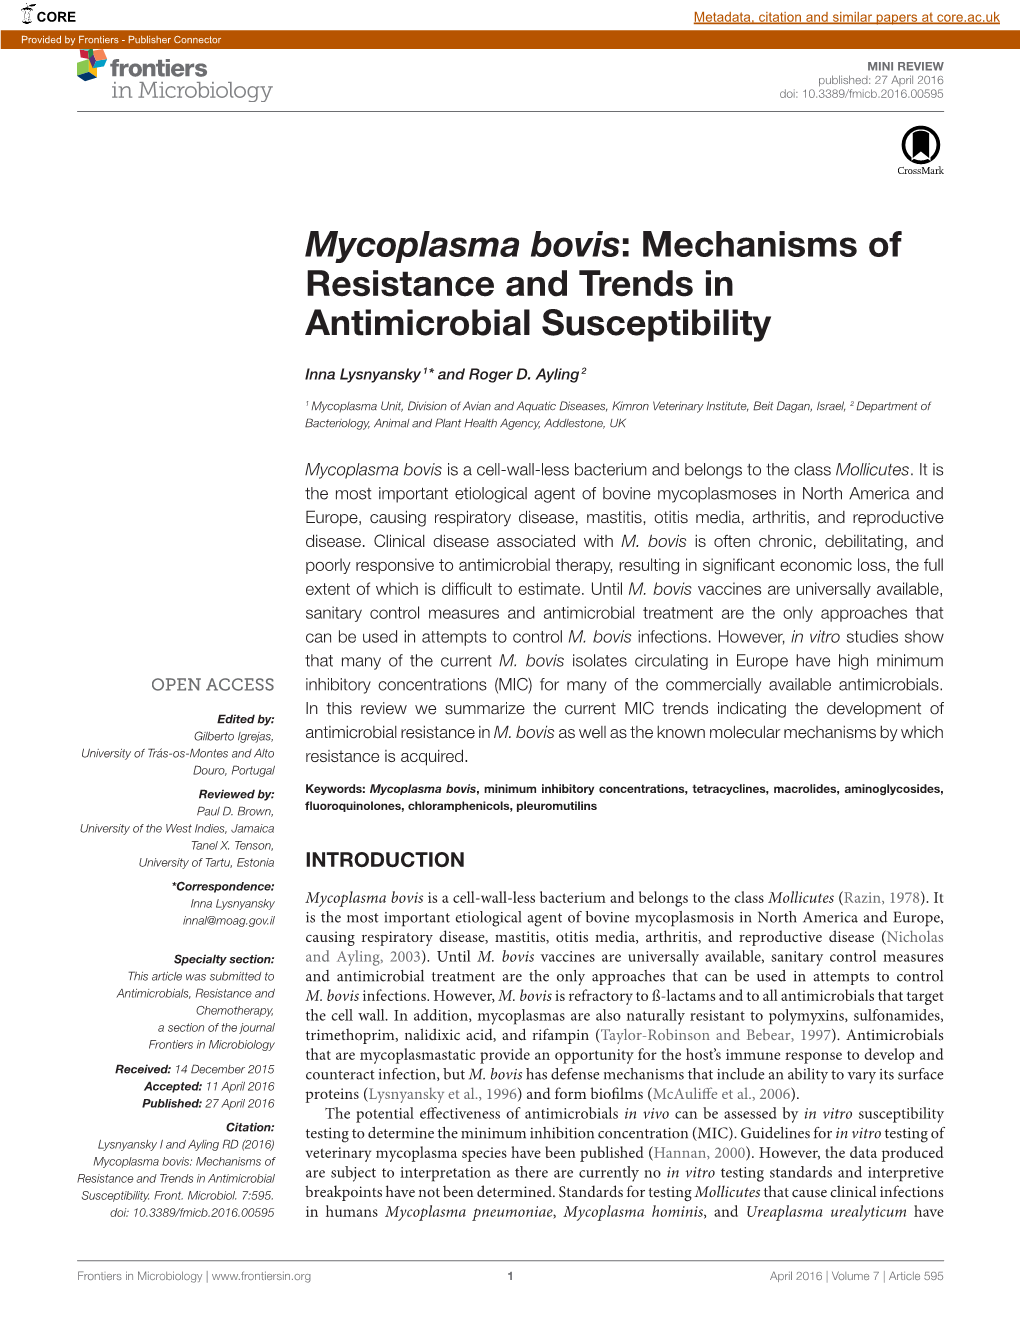 Mycoplasma Bovis: Mechanisms of Resistance and Trends in Antimicrobial Susceptibility